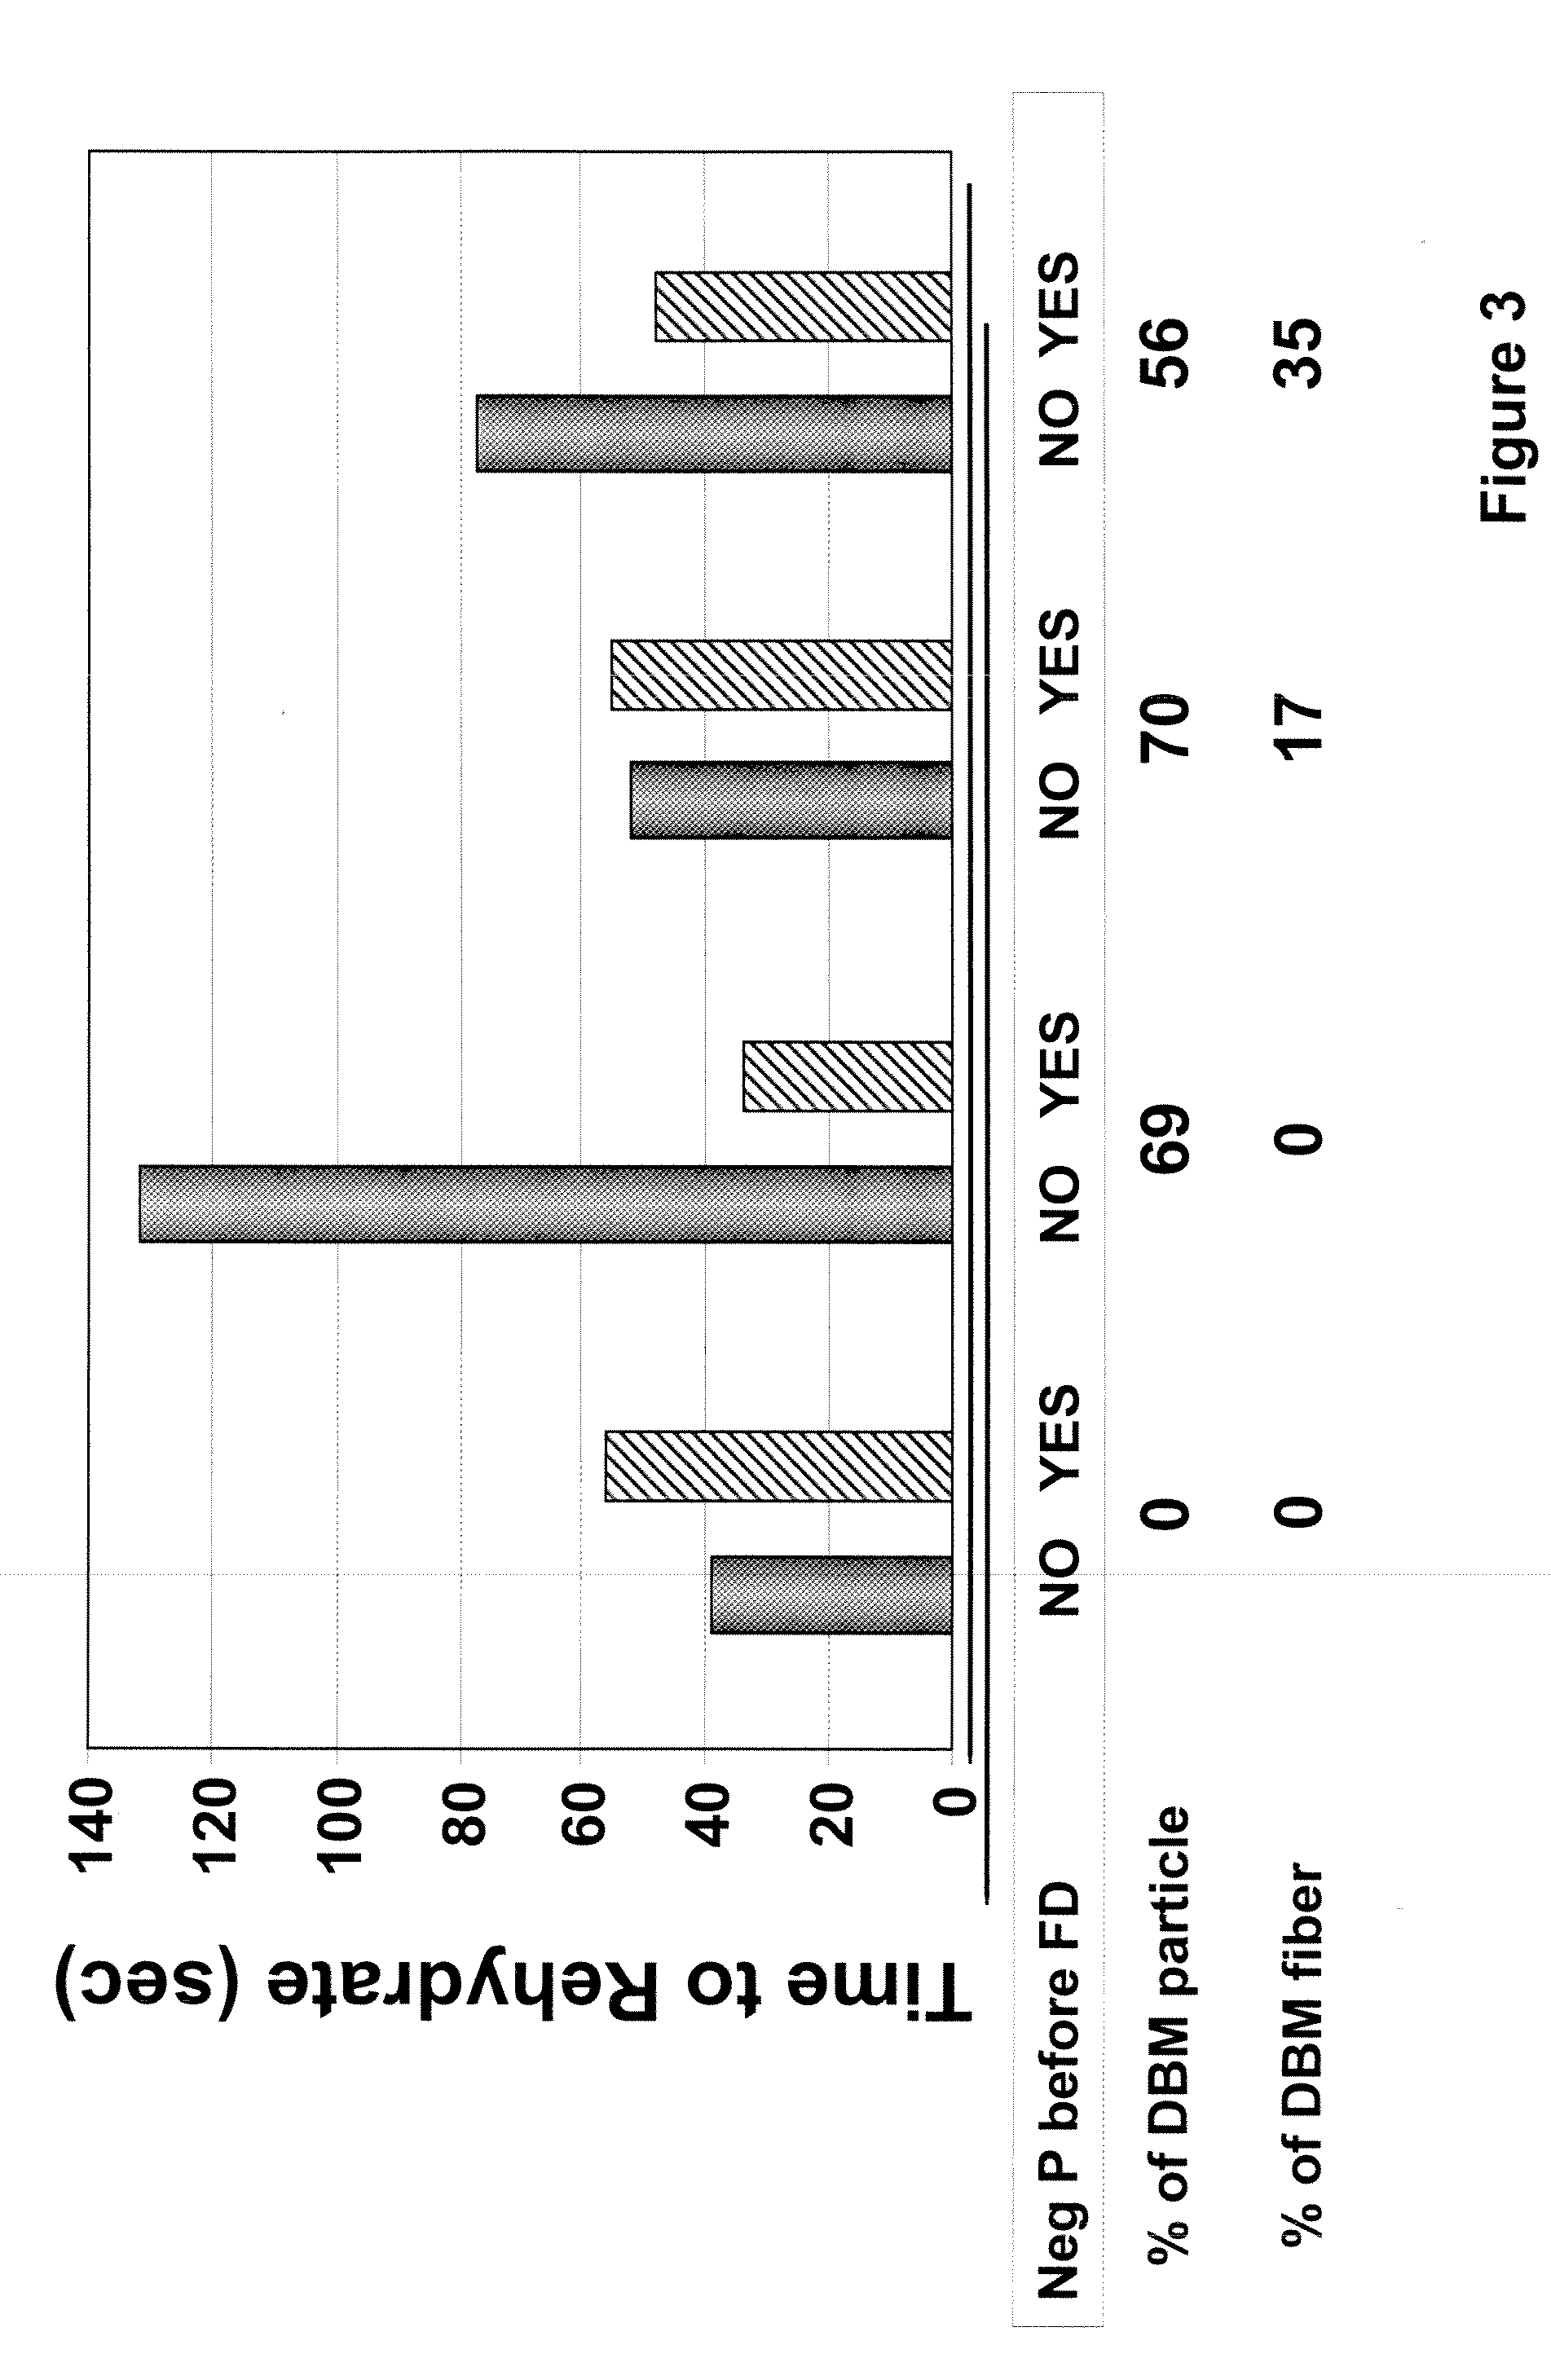 Composition for a tissue repair implant and methods of making the same